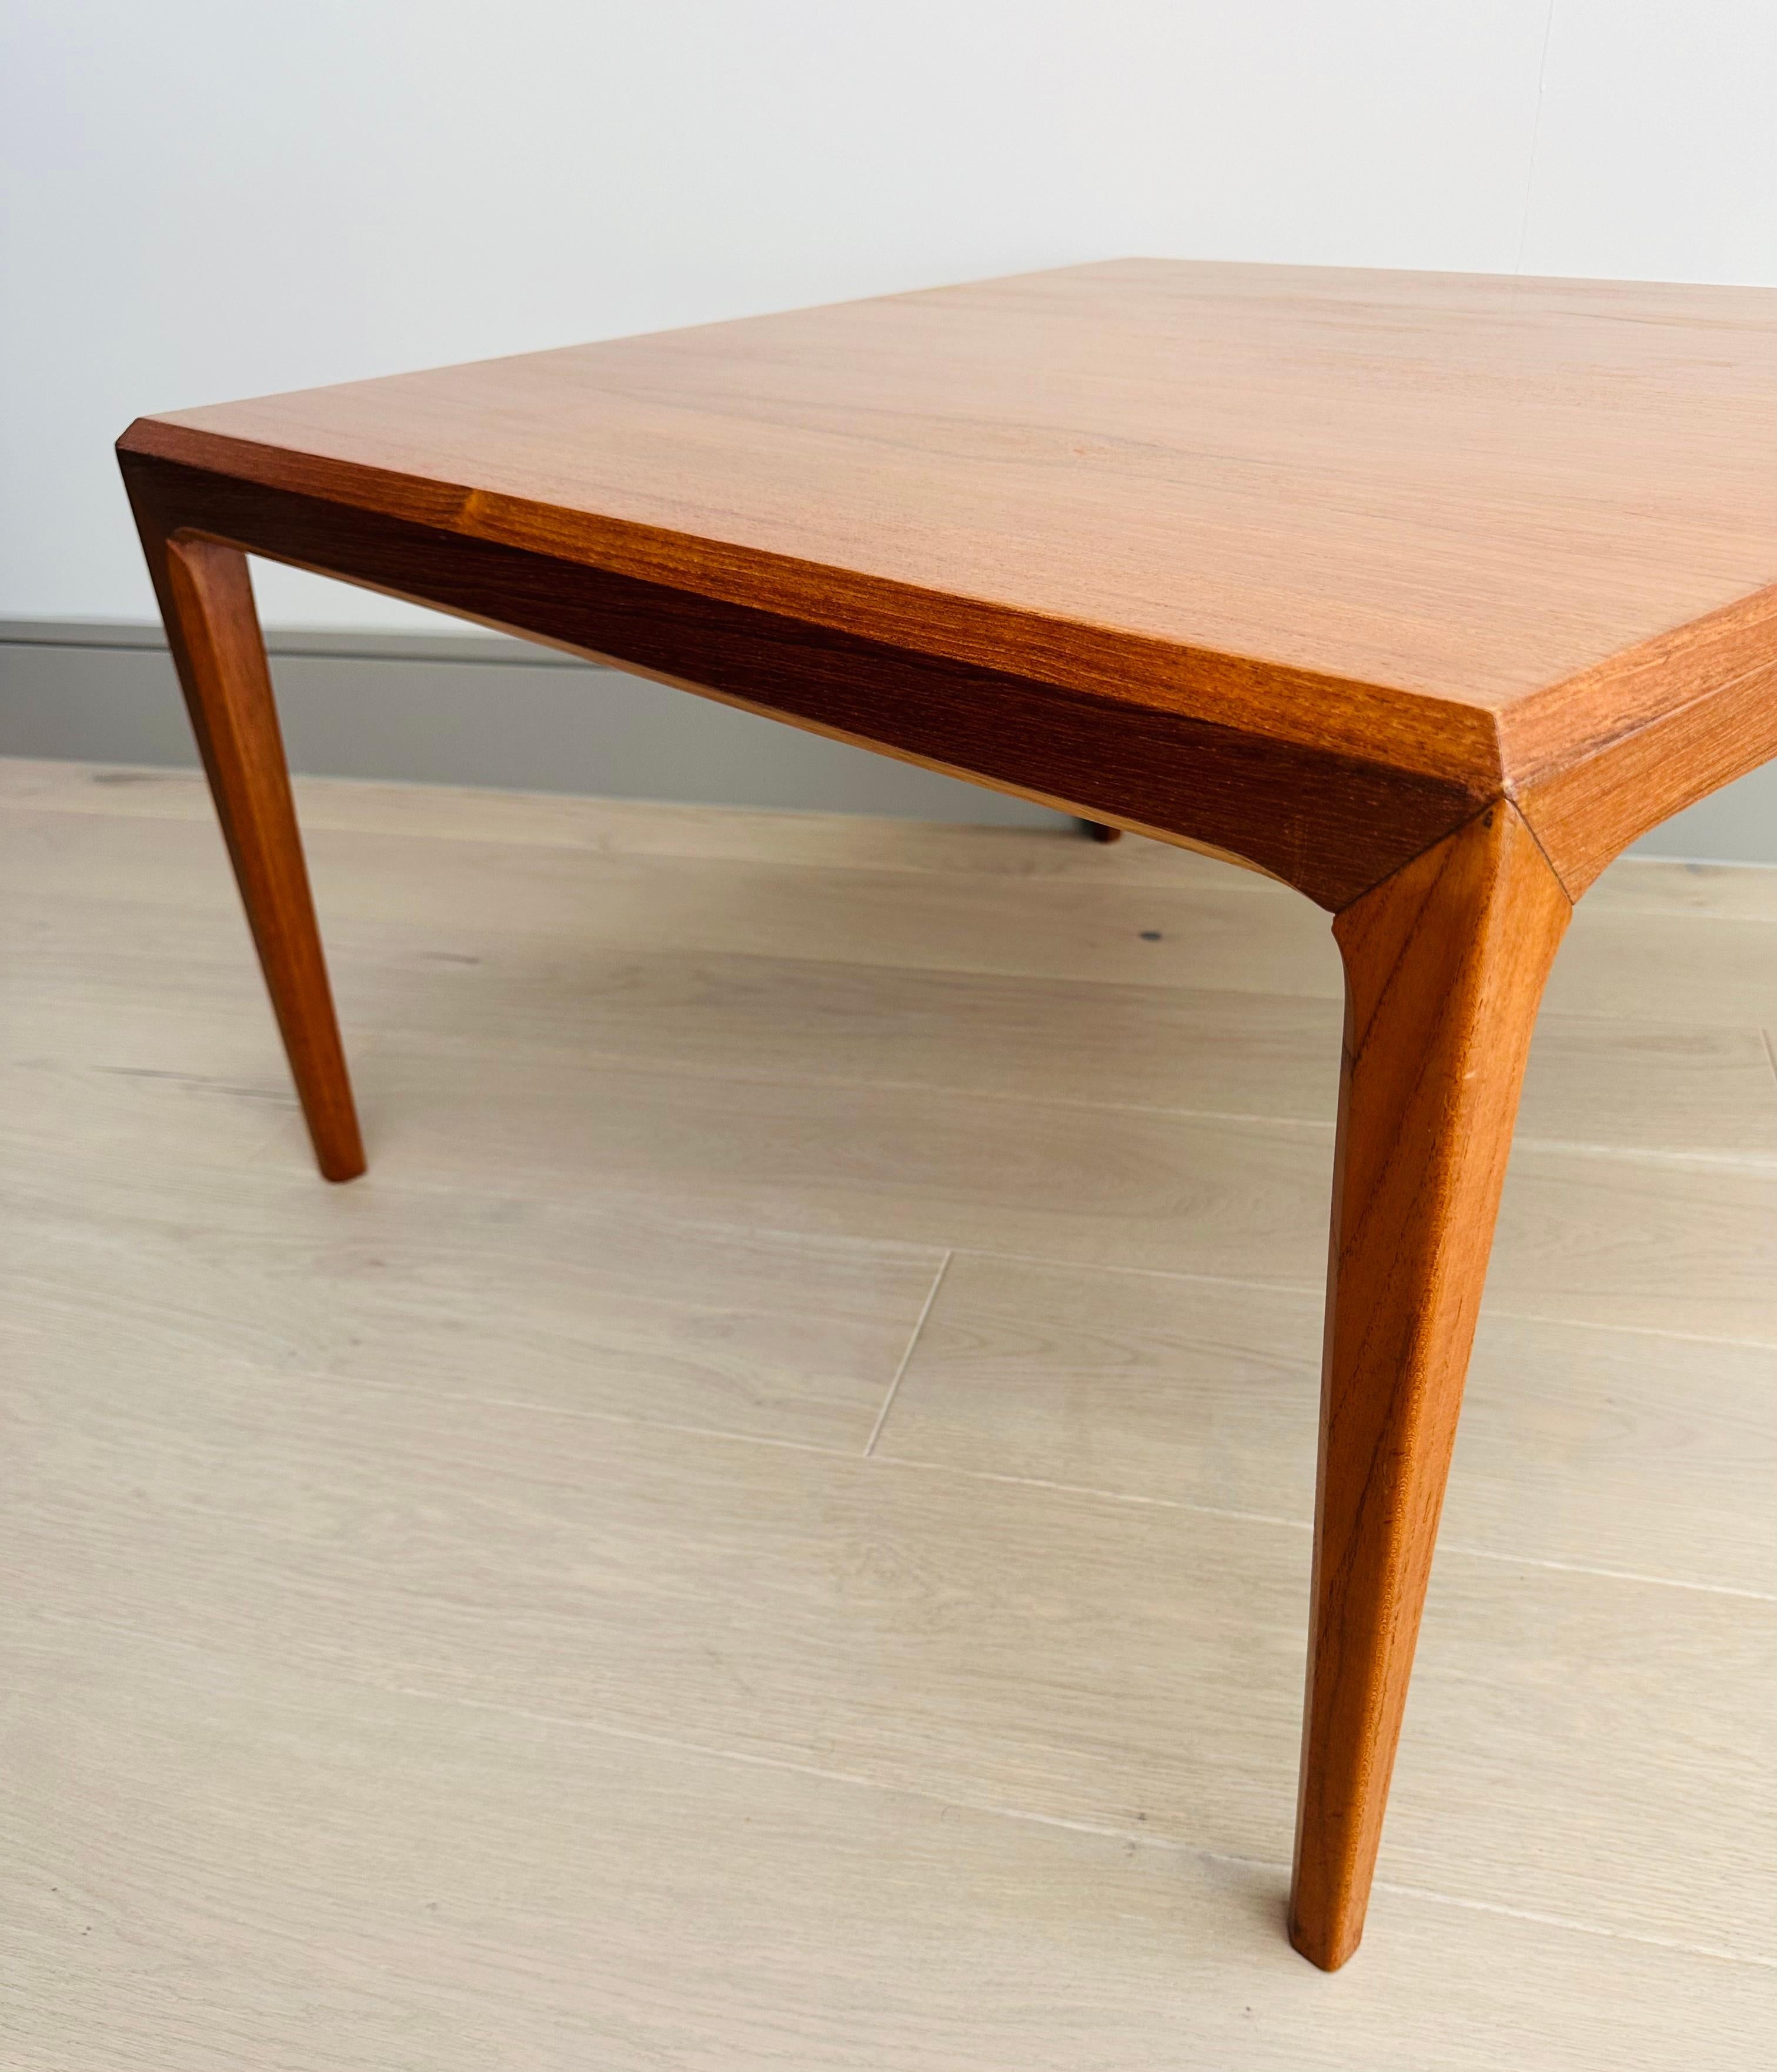 1960s Danish Silkeborg Furniture Square Teak Coffee Table by Johannes Andersen For Sale 5